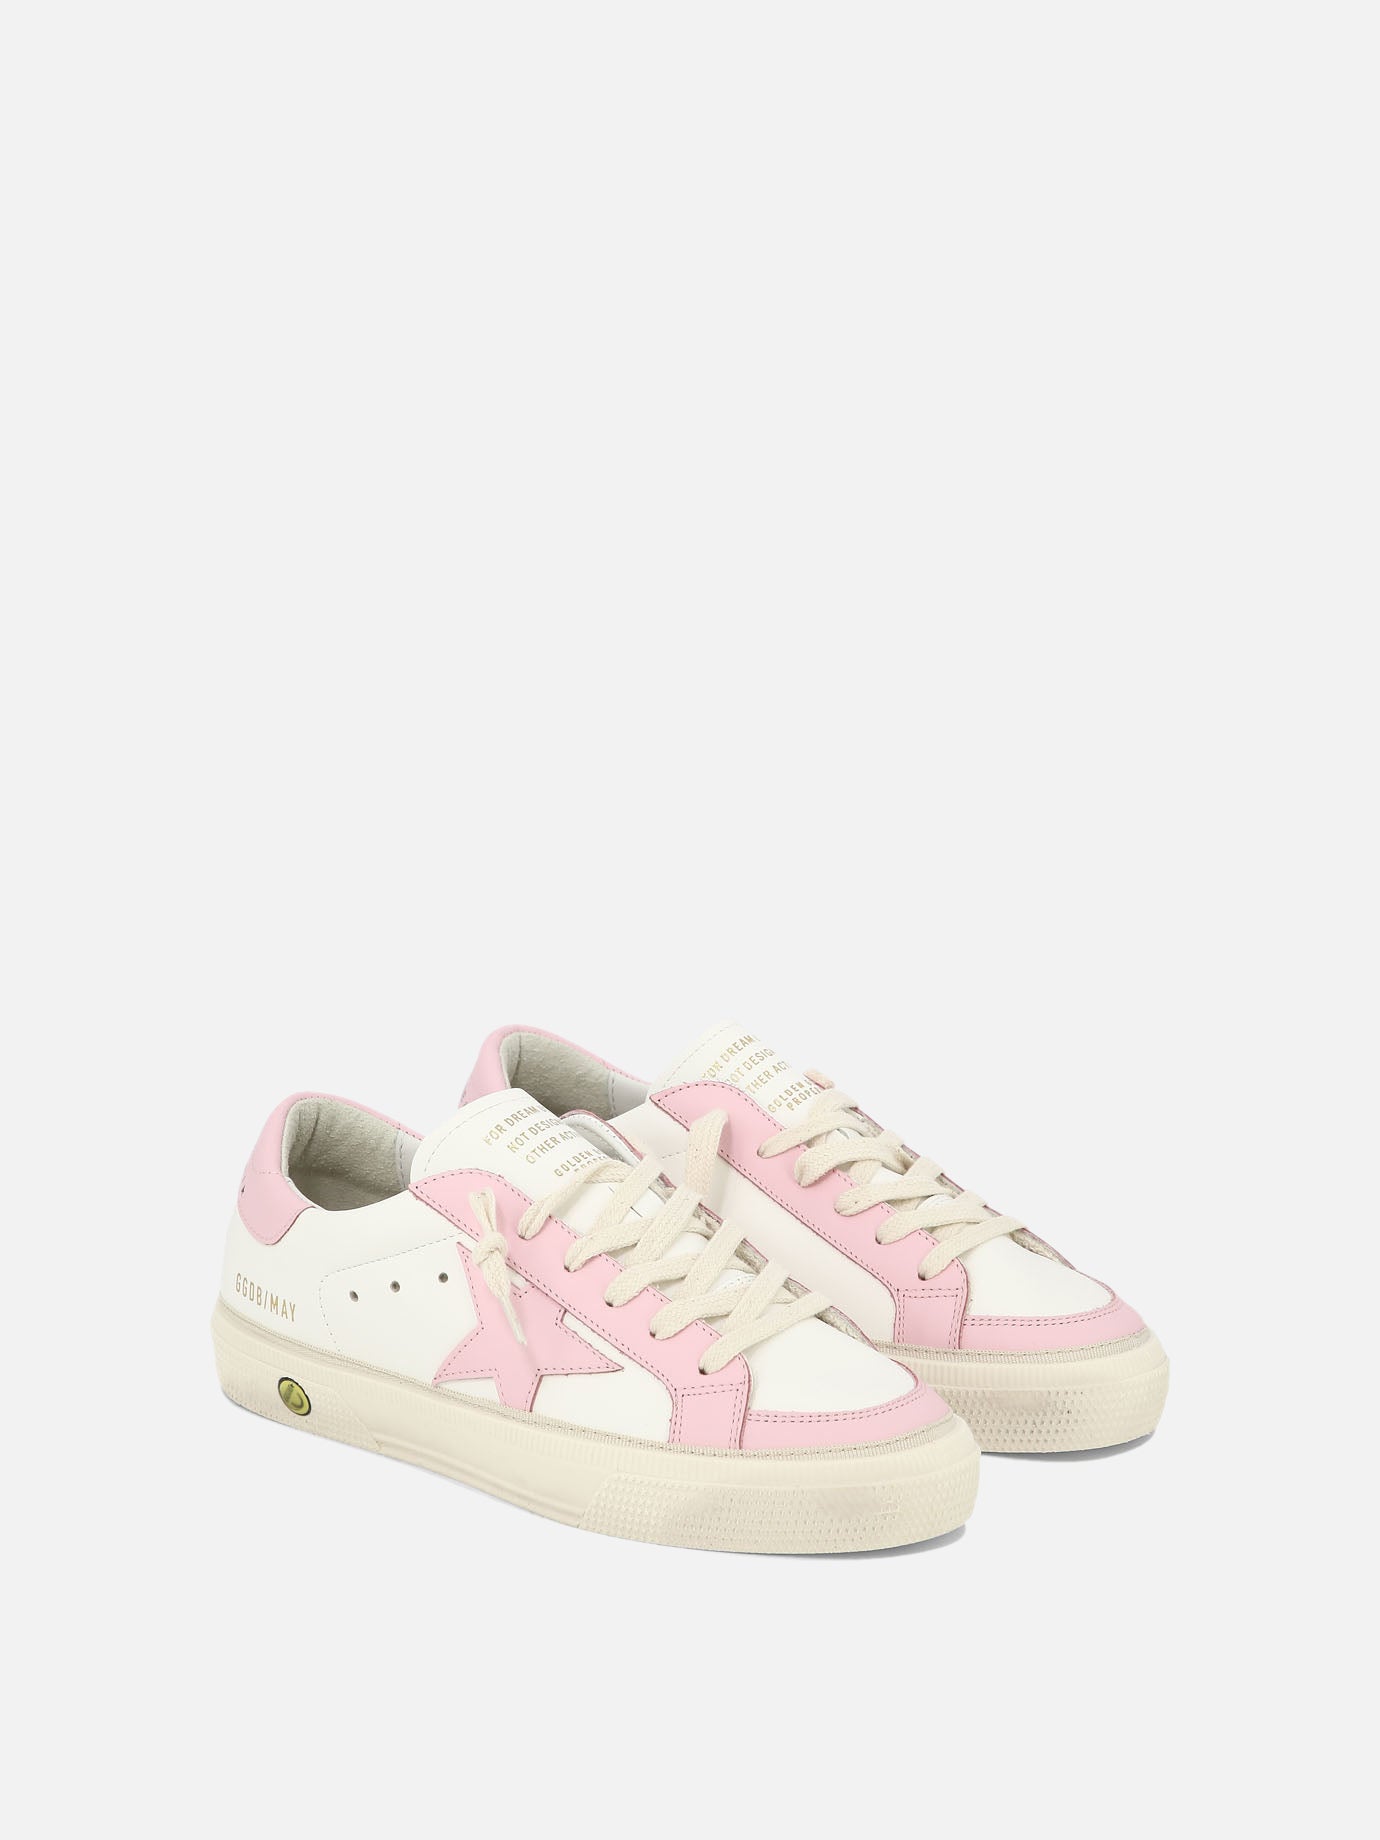 "May" sneakers